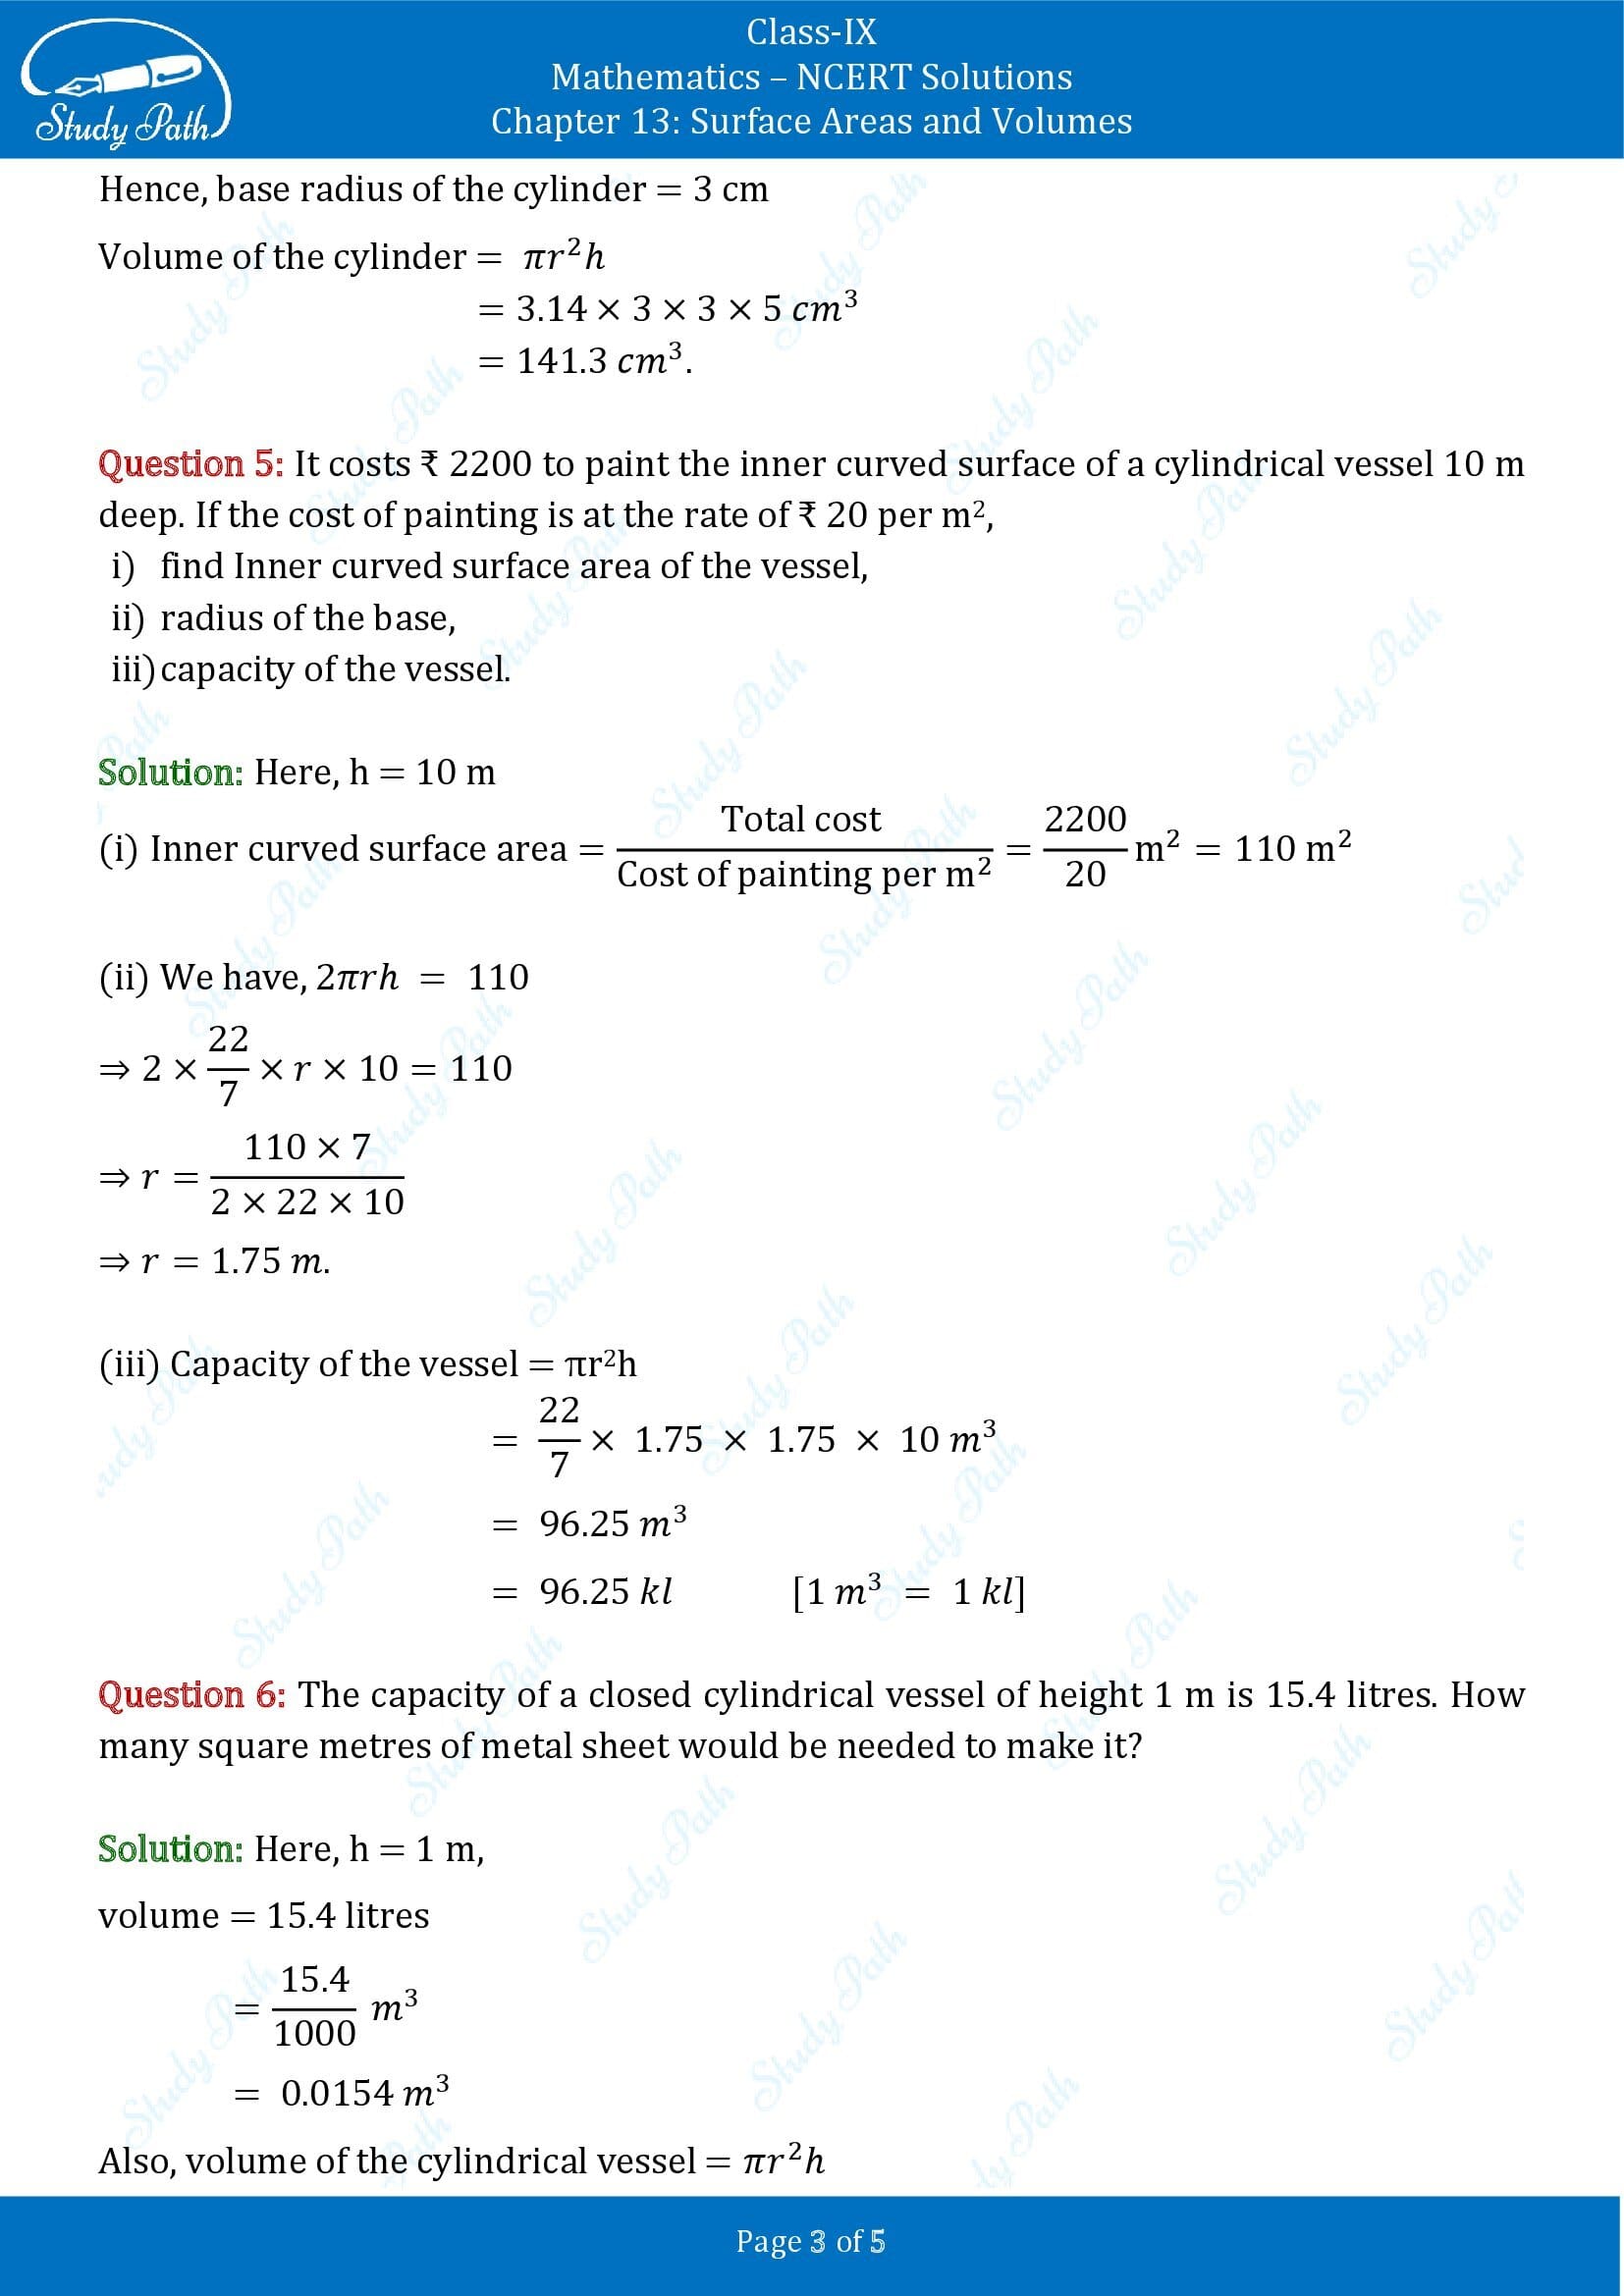 NCERT Solutions for Class 9 Maths Chapter 13 Surface Areas and Volumes Exercise 13.6 00003